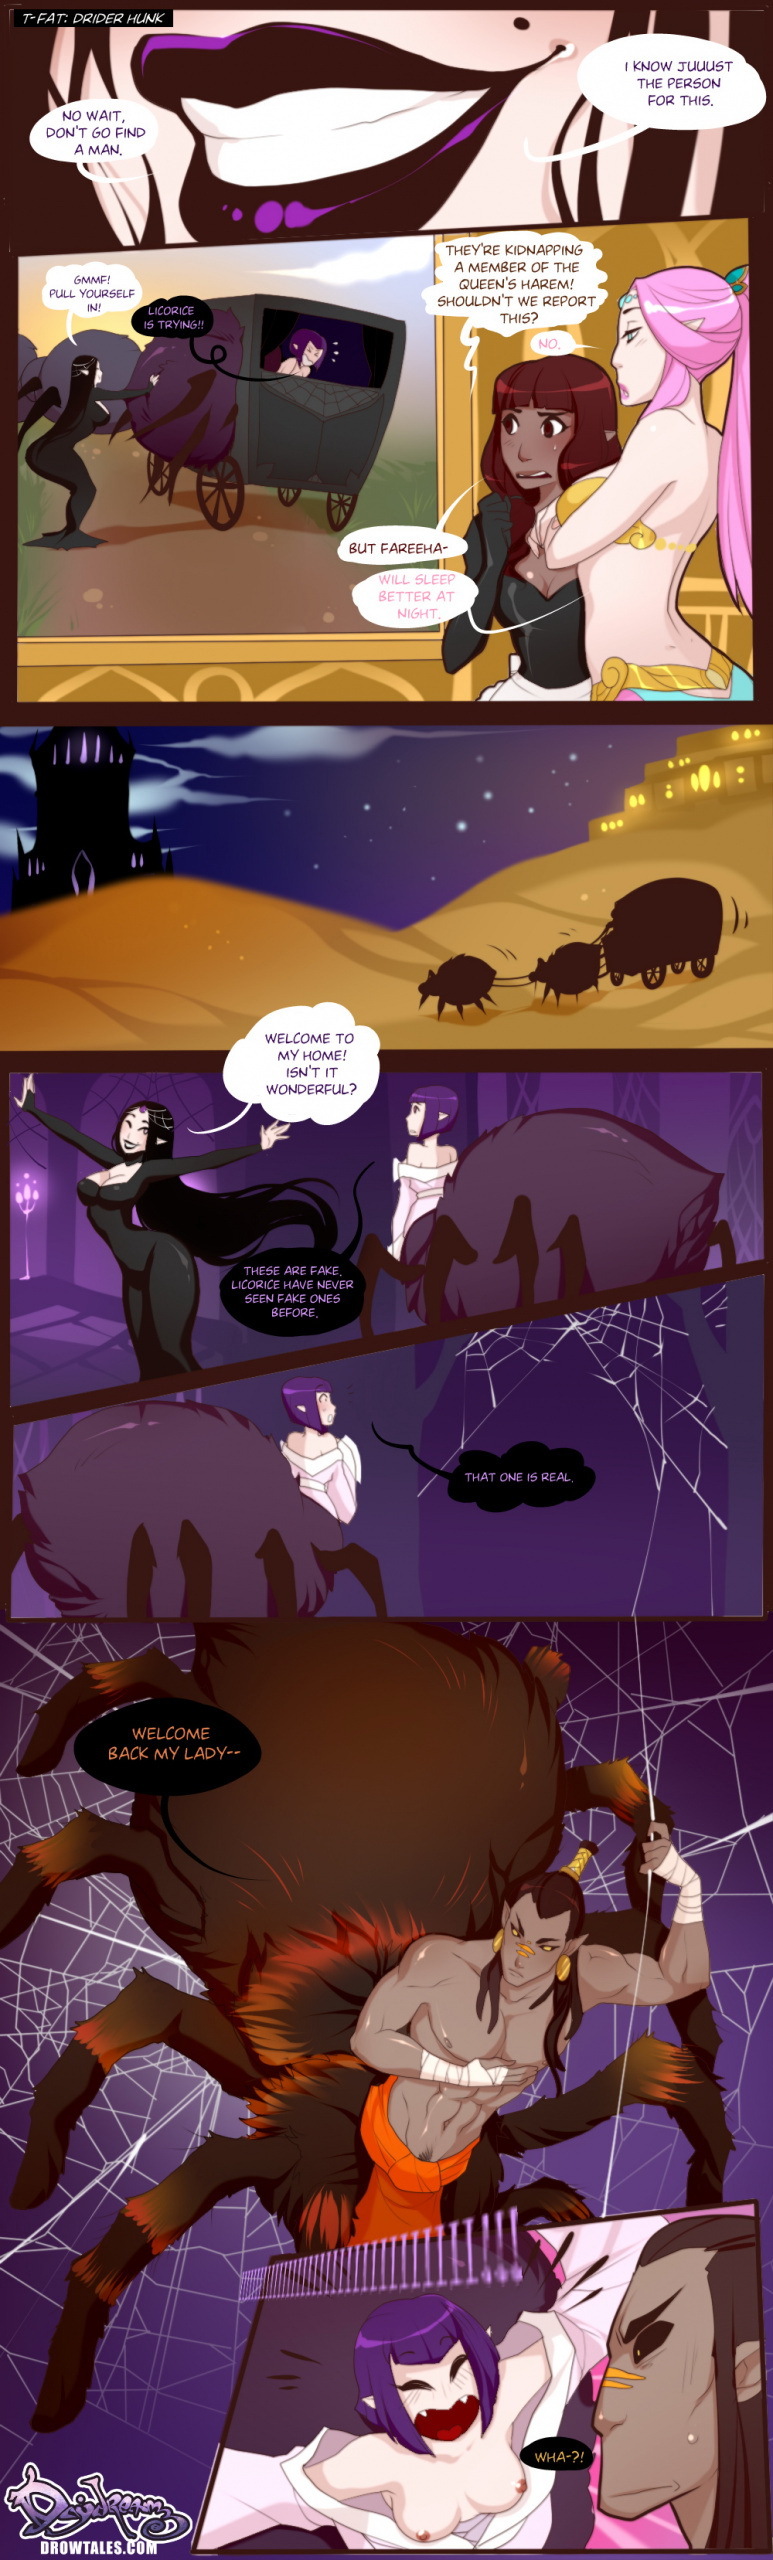 Queen of Butts - Page 75